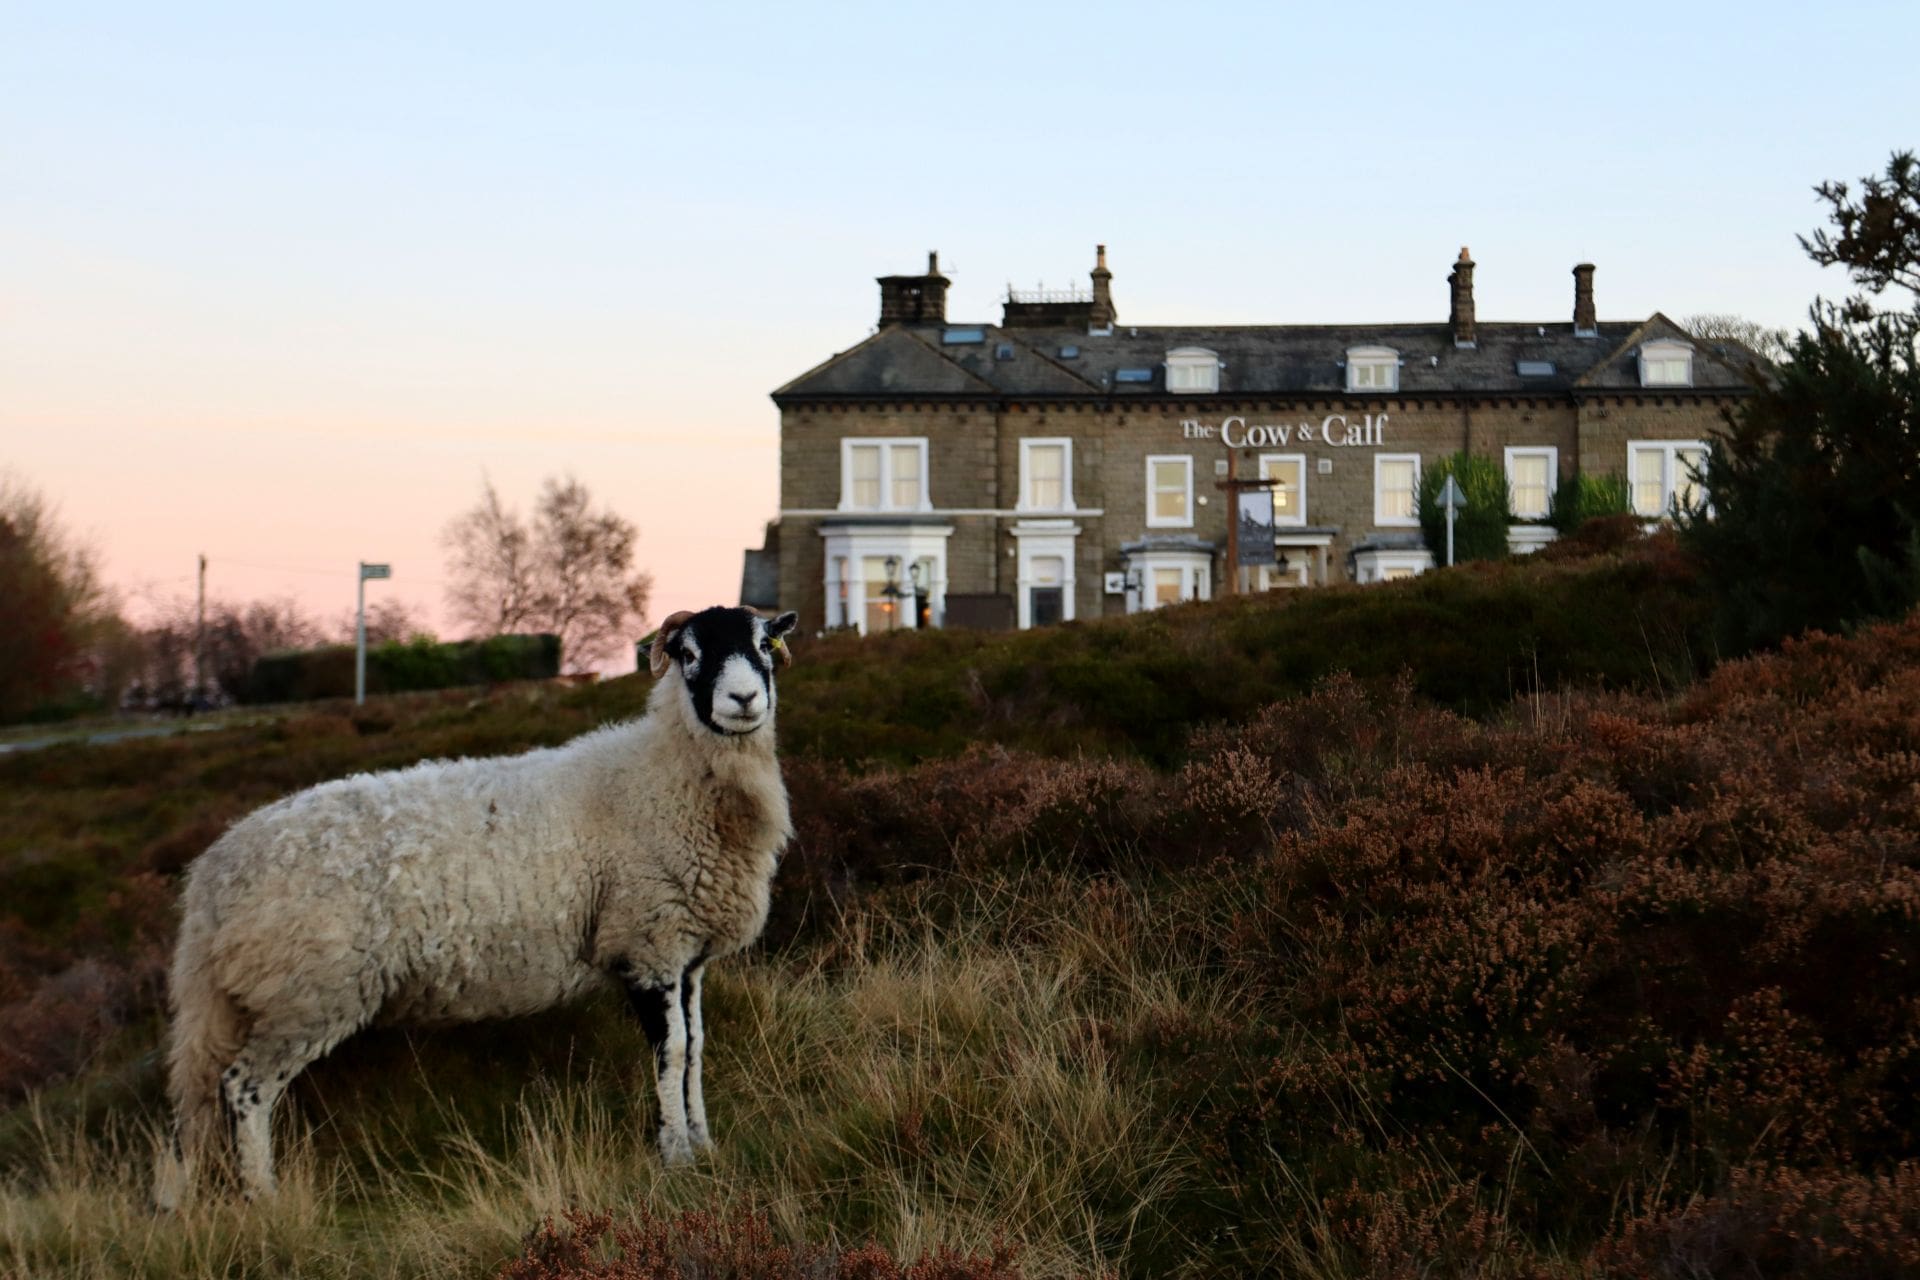 sheep-standing-on-rugged-moors-in-front-of-pub-the-cow-and-calf-in-ilkley-england-uk-day-trips-from-leeds